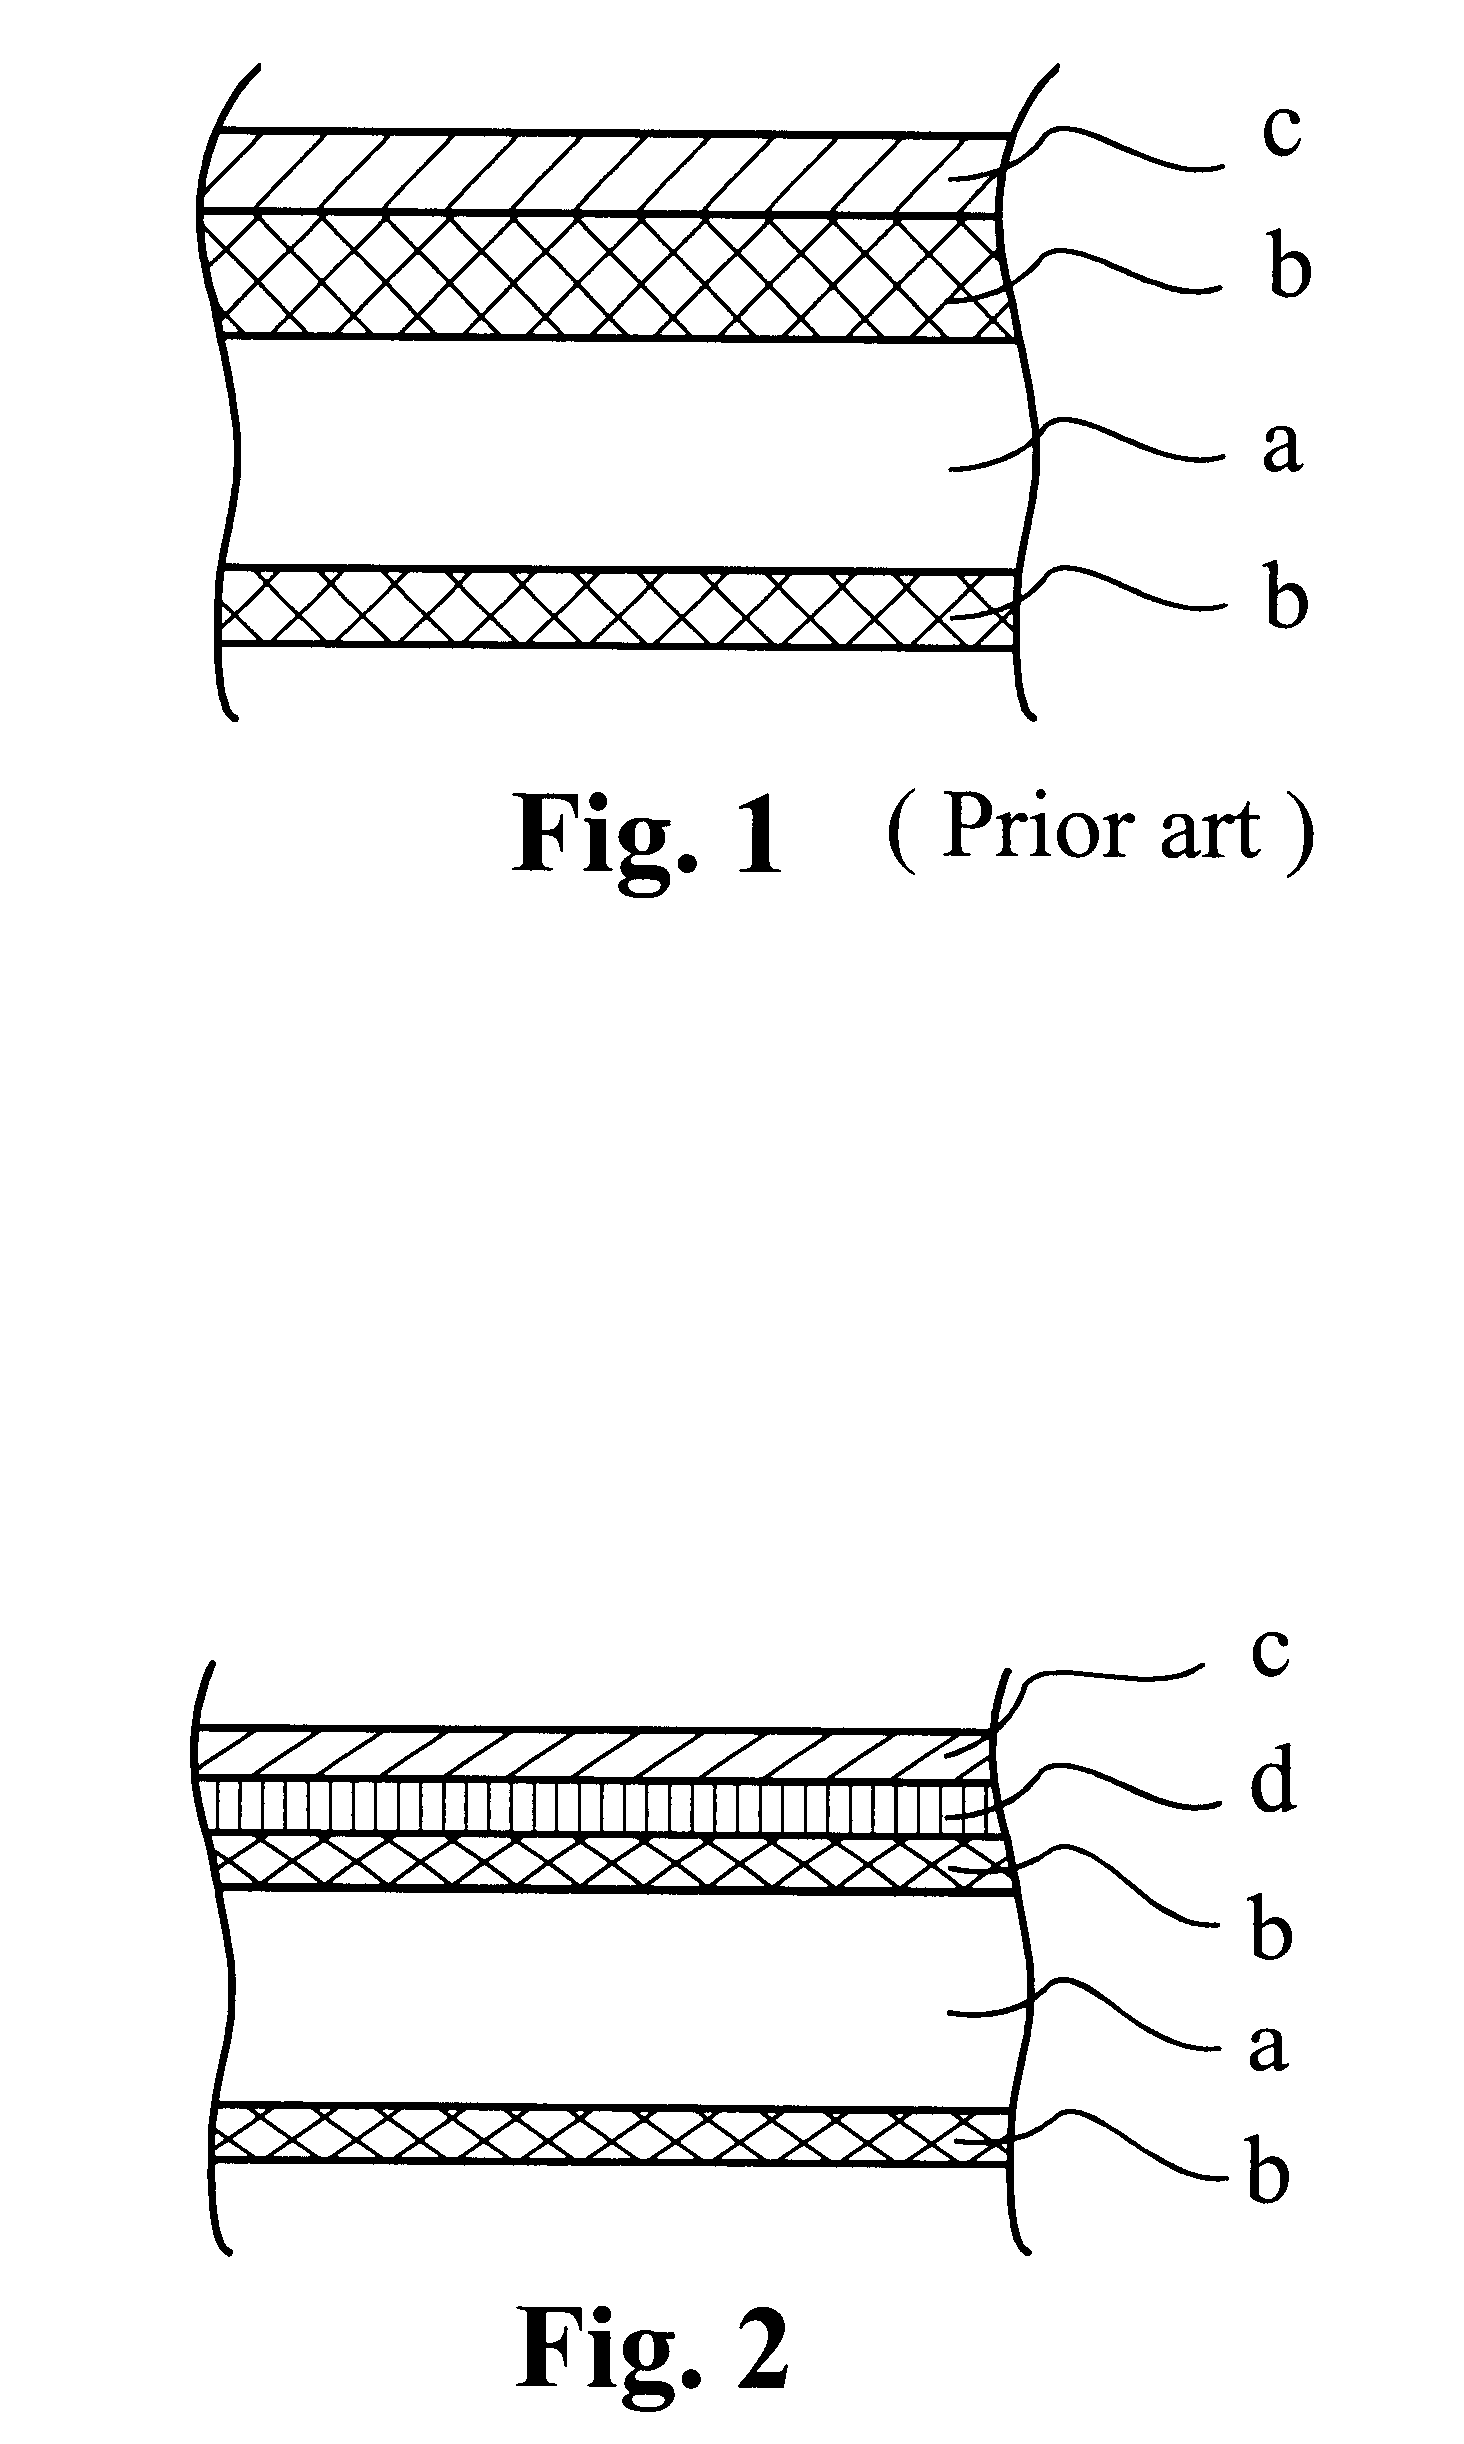 Method of manufacturing an assembly of brazed dissimilar metal components